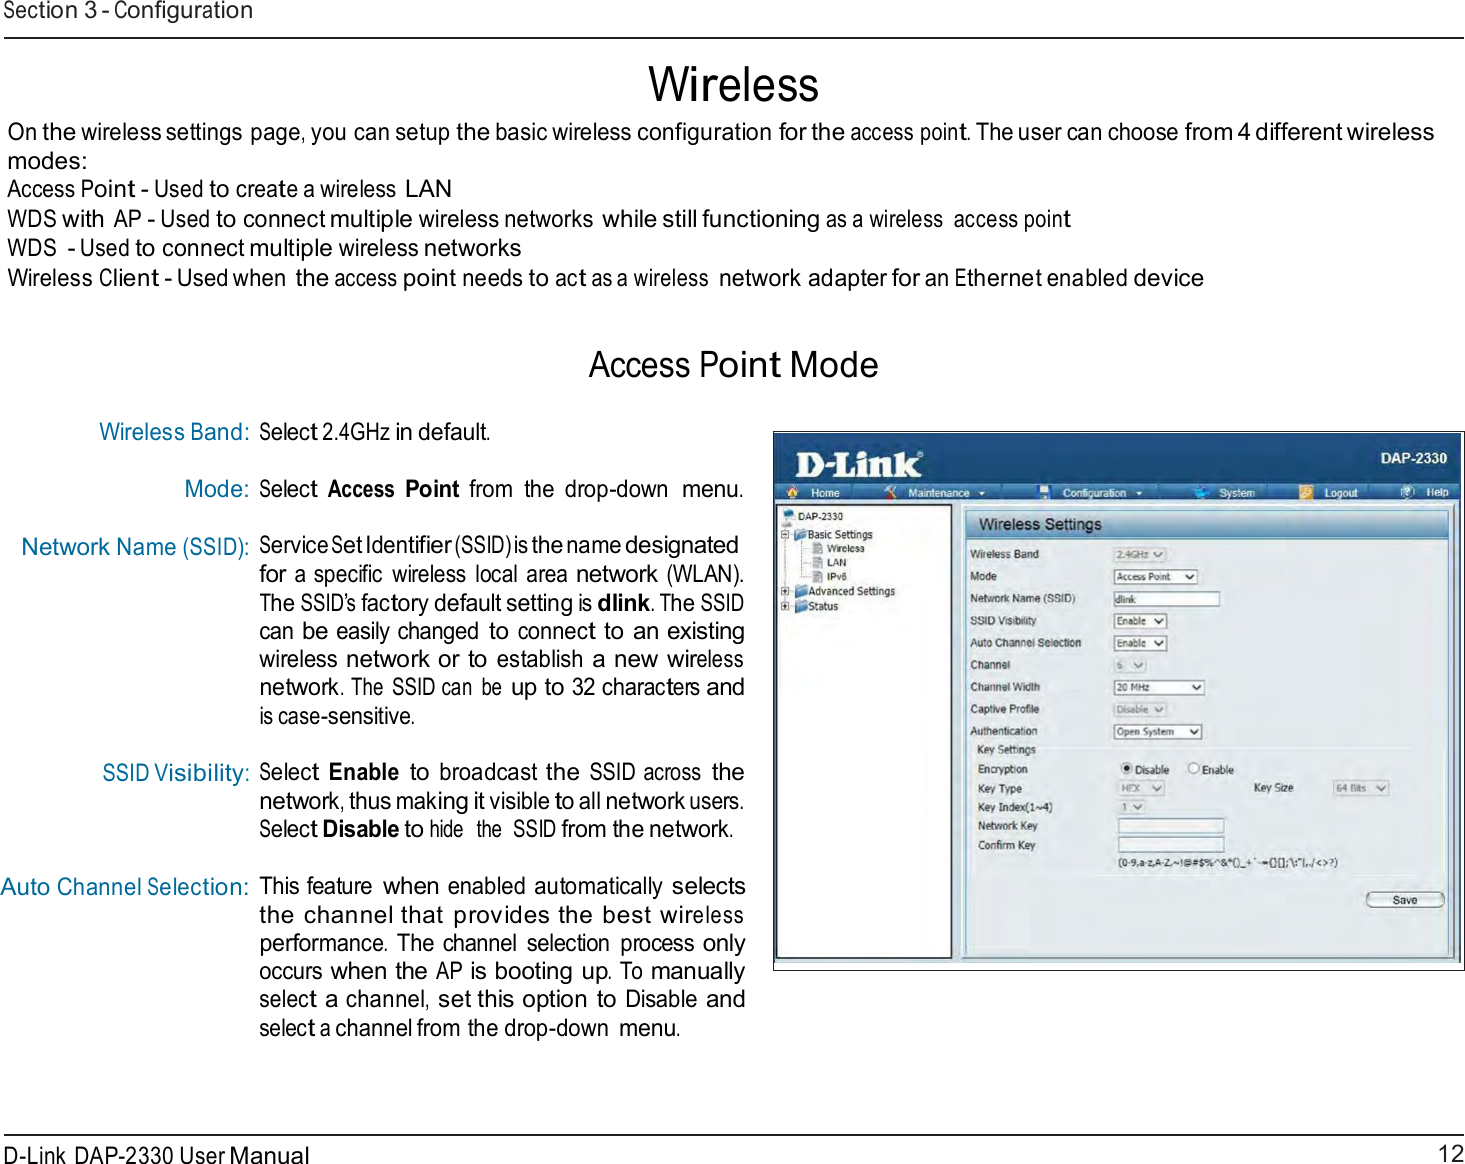 12 D-Link DAP-2330 User ManualSection 3 - Configuration       Wireless On the wireless settings page, you can setup the basic wireless configuration for the access point. The user can choose from 4 different wireless modes: Access Point - Used to create a wireless LAN WDS with AP - Used to connect multiple wireless networks while still functioning as a wireless  access point WDS - Used to connect multiple wireless networks Wireless Client - Used when the access point needs to act as a wireless network adapter for an Ethernet enabled device    Access Point Mode   Wireless Band: Mode: Network Name (SSID):           SSID Visibility:     Auto Channel Selection: Select 2.4GHz in default. Select Access Point from  the drop-down menu. Service Set Identifier (SSID) is the name designated for a specific  wireless  local area network (WLAN). The SSID’s factory default setting is dlink. The SSID can be easily changed to connect to an existing wireless network or to establish a new wireless network. The  SSID can  be up to 32 characters and is case-sensitive.  Select Enable to broadcast the SSID across the network, thus making it visible to all network users. Select Disable to hide  the  SSID from the network.  This feature when enabled automatically selects the channel that provides the best wireless performance. The channel  selection  process only occurs when the AP is booting up. To manually select a channel, set this option to Disable and select a channel from the drop-down menu. 